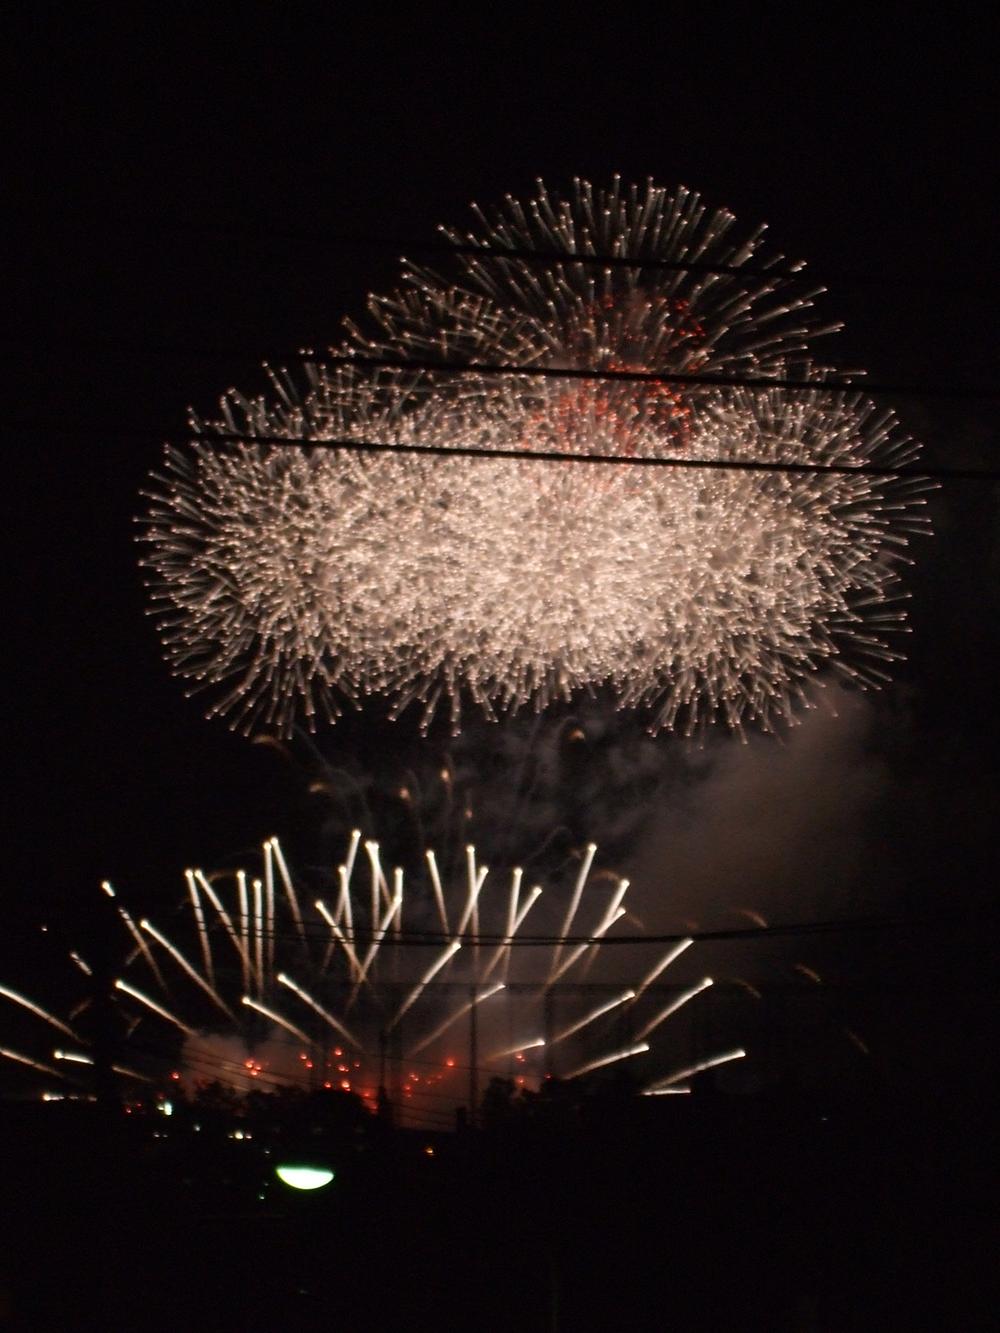 View photos from the dwelling unit. Appearance of the fireworks display as seen from the Building D.